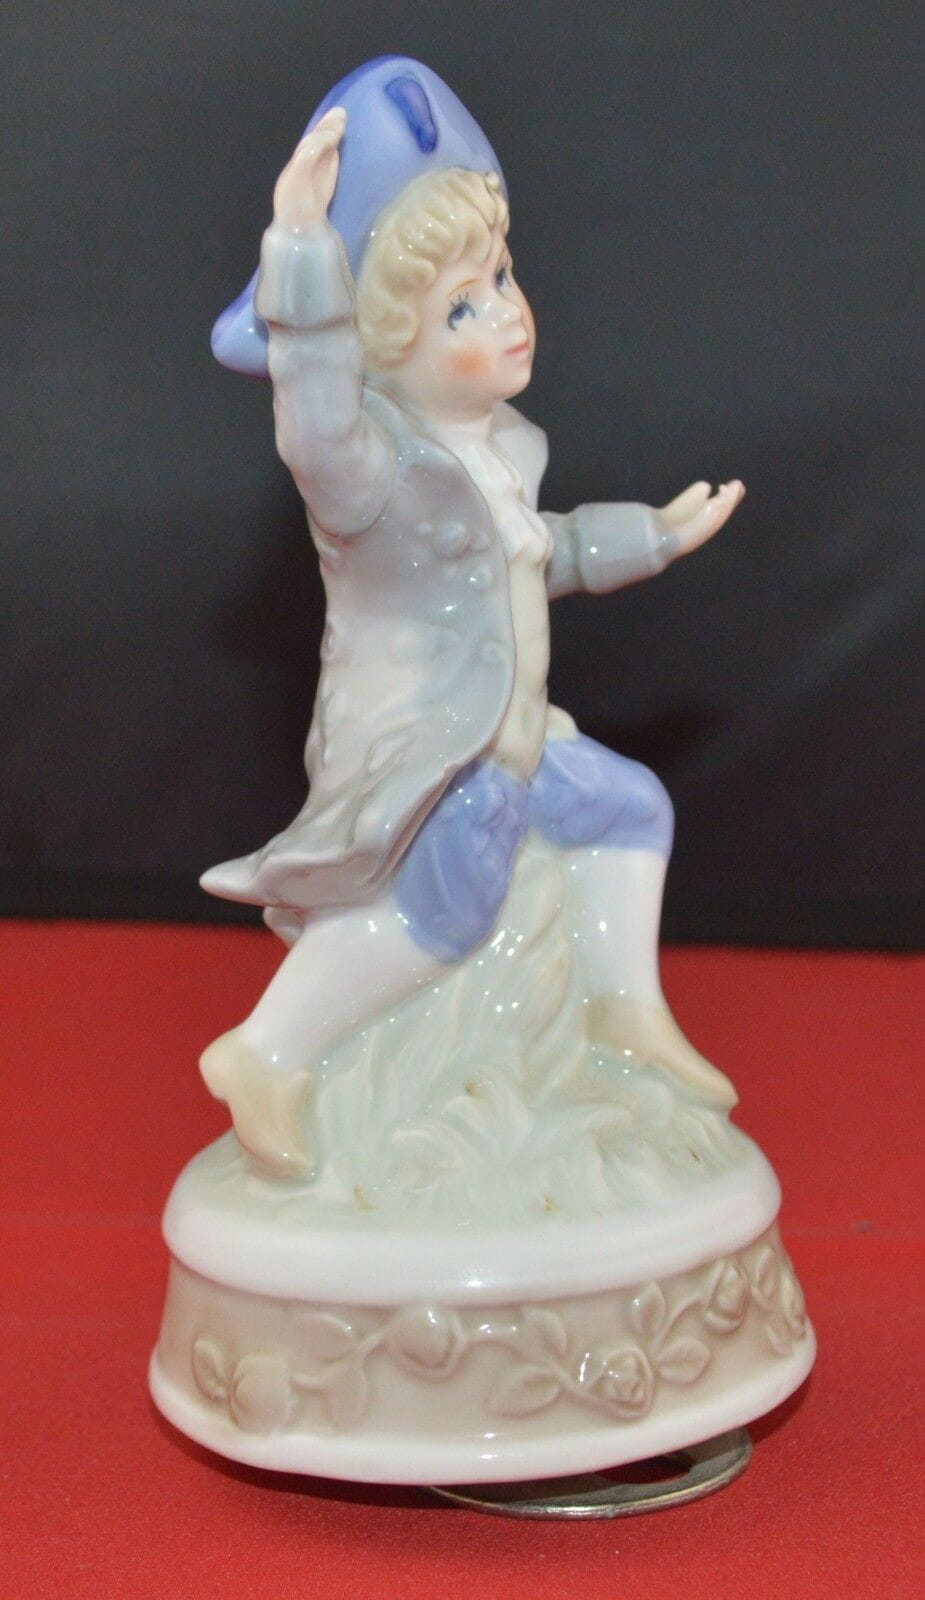 DECORATIVE MUSICAL FIGURINE BOY SITTING ON A TREE STUMP(PREVIOUSLY OWNED) GOOD CONDITION - TMD167207